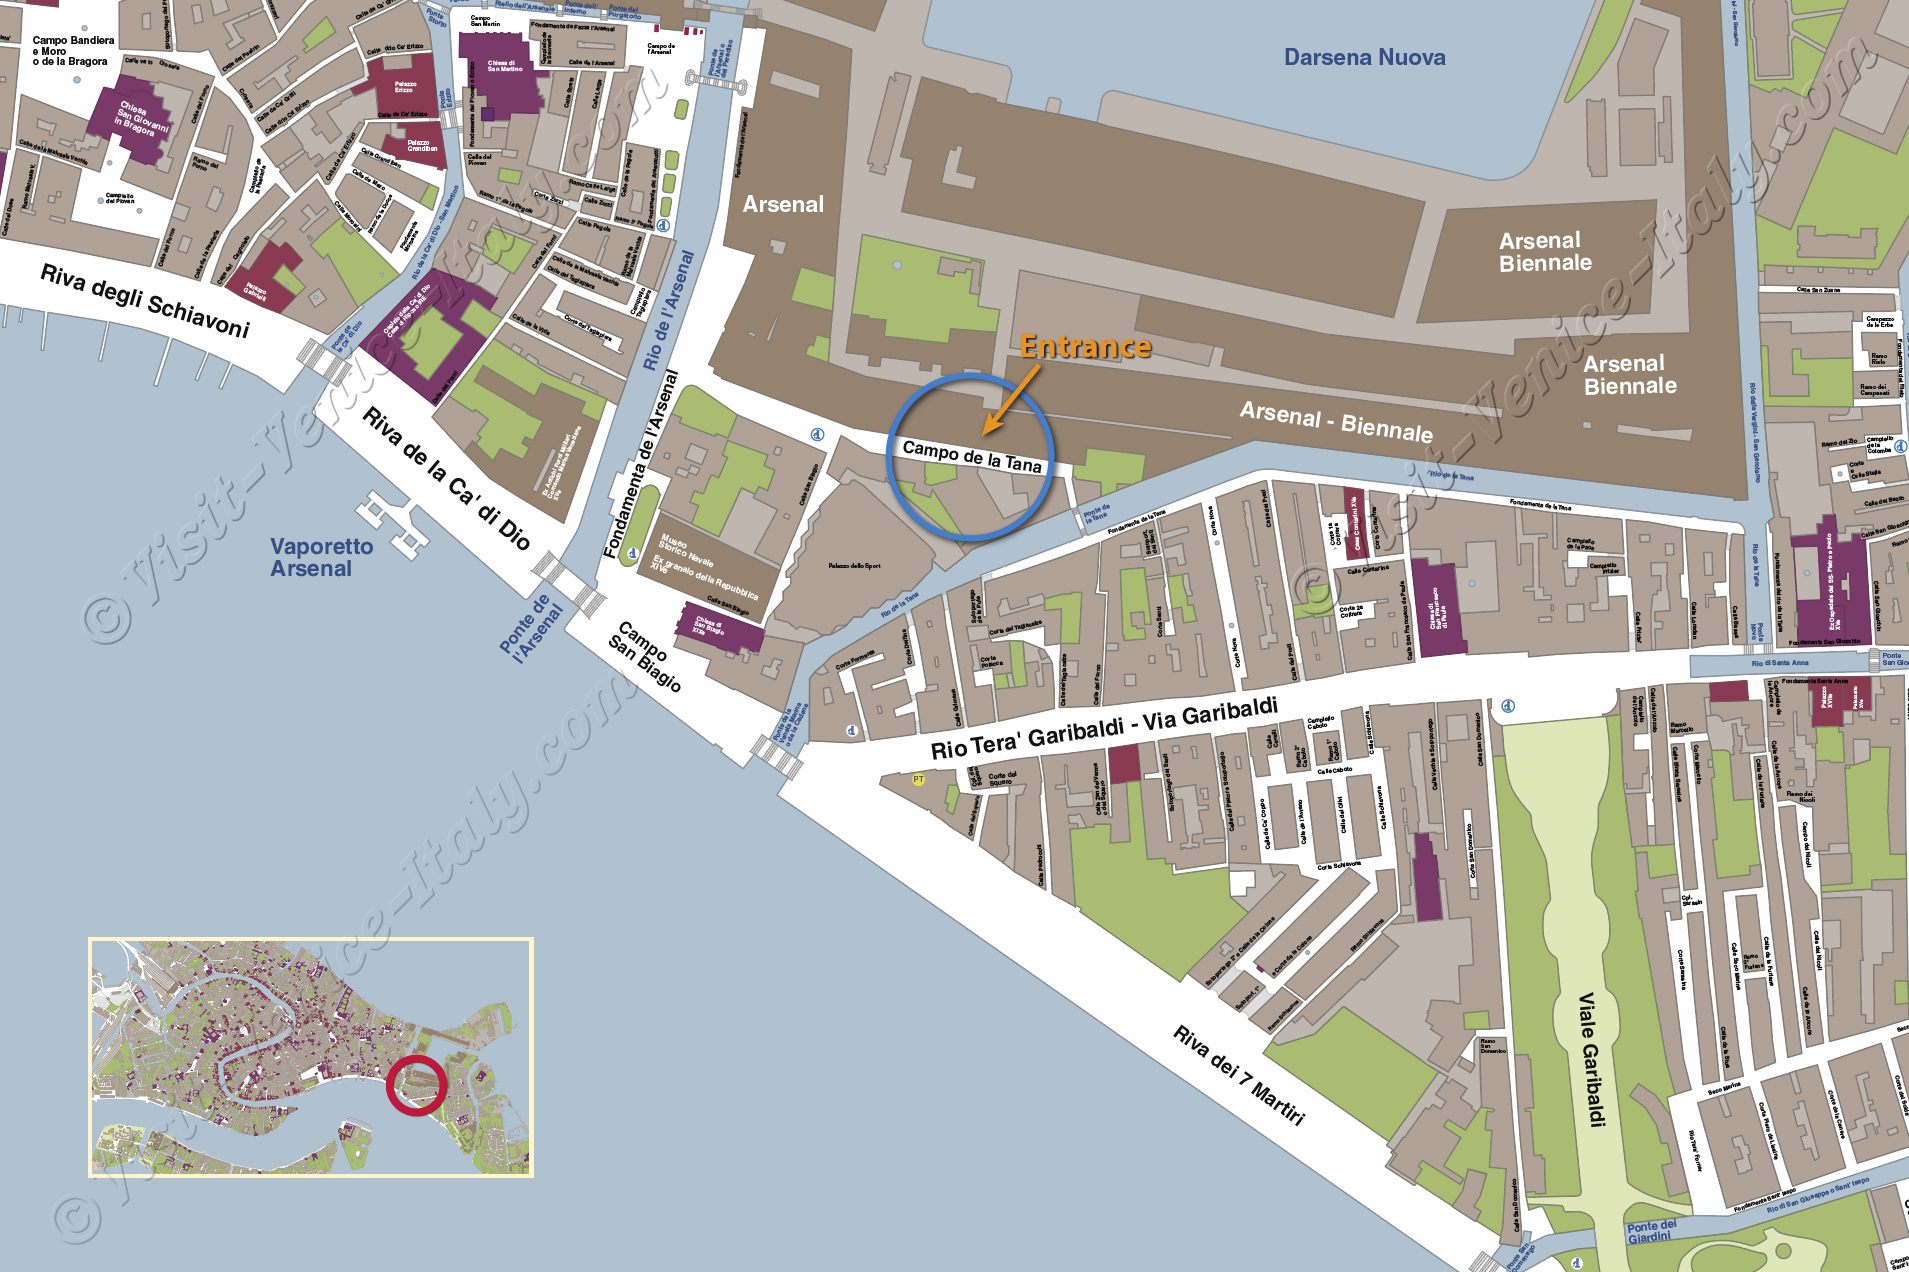 Venice Art and Architecture Biennale Map and Adress